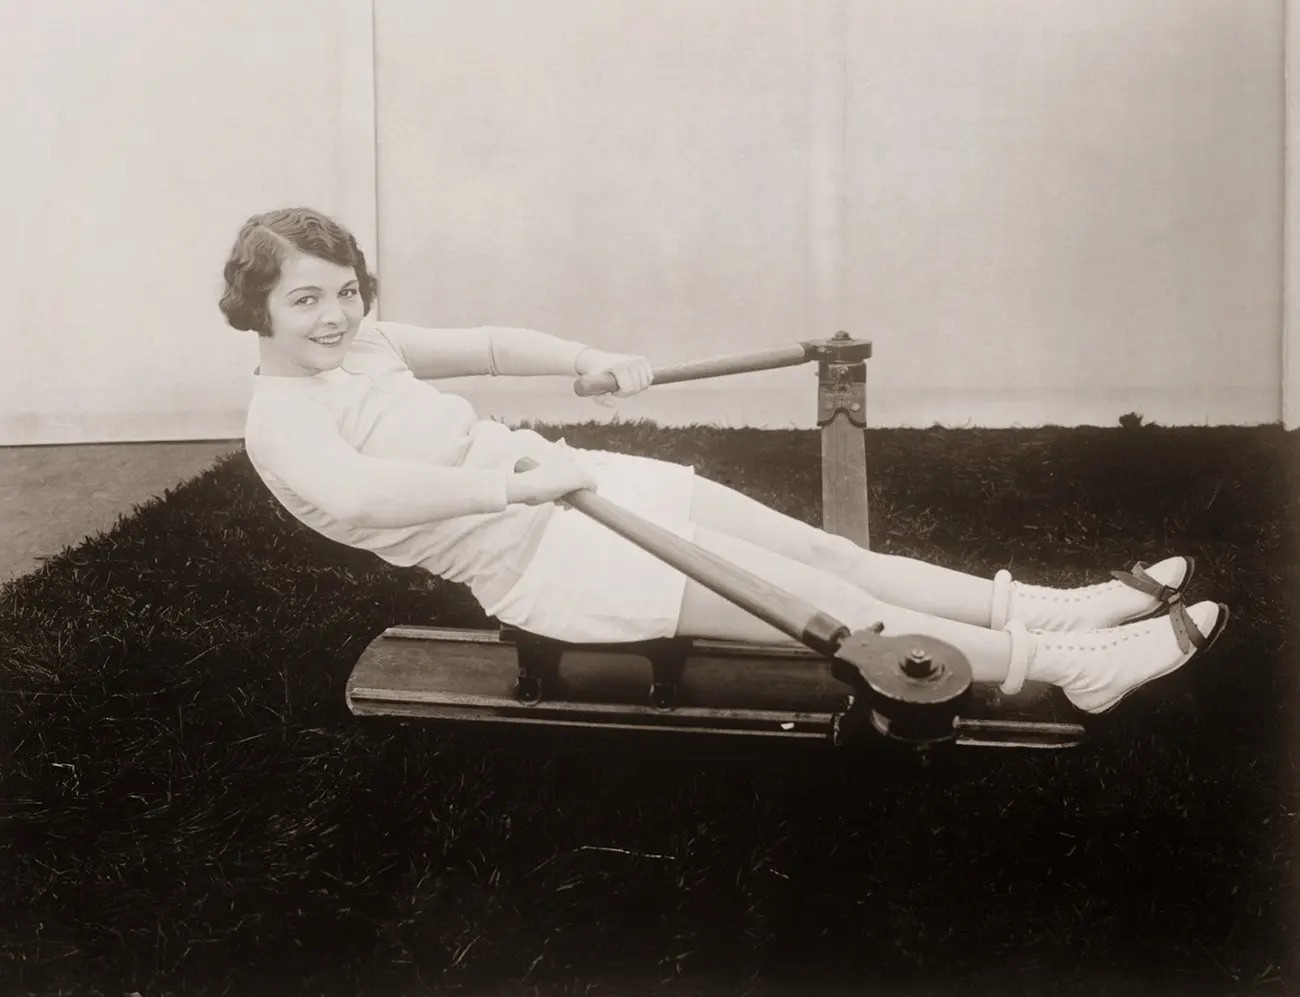 Rowing machine in 1925.